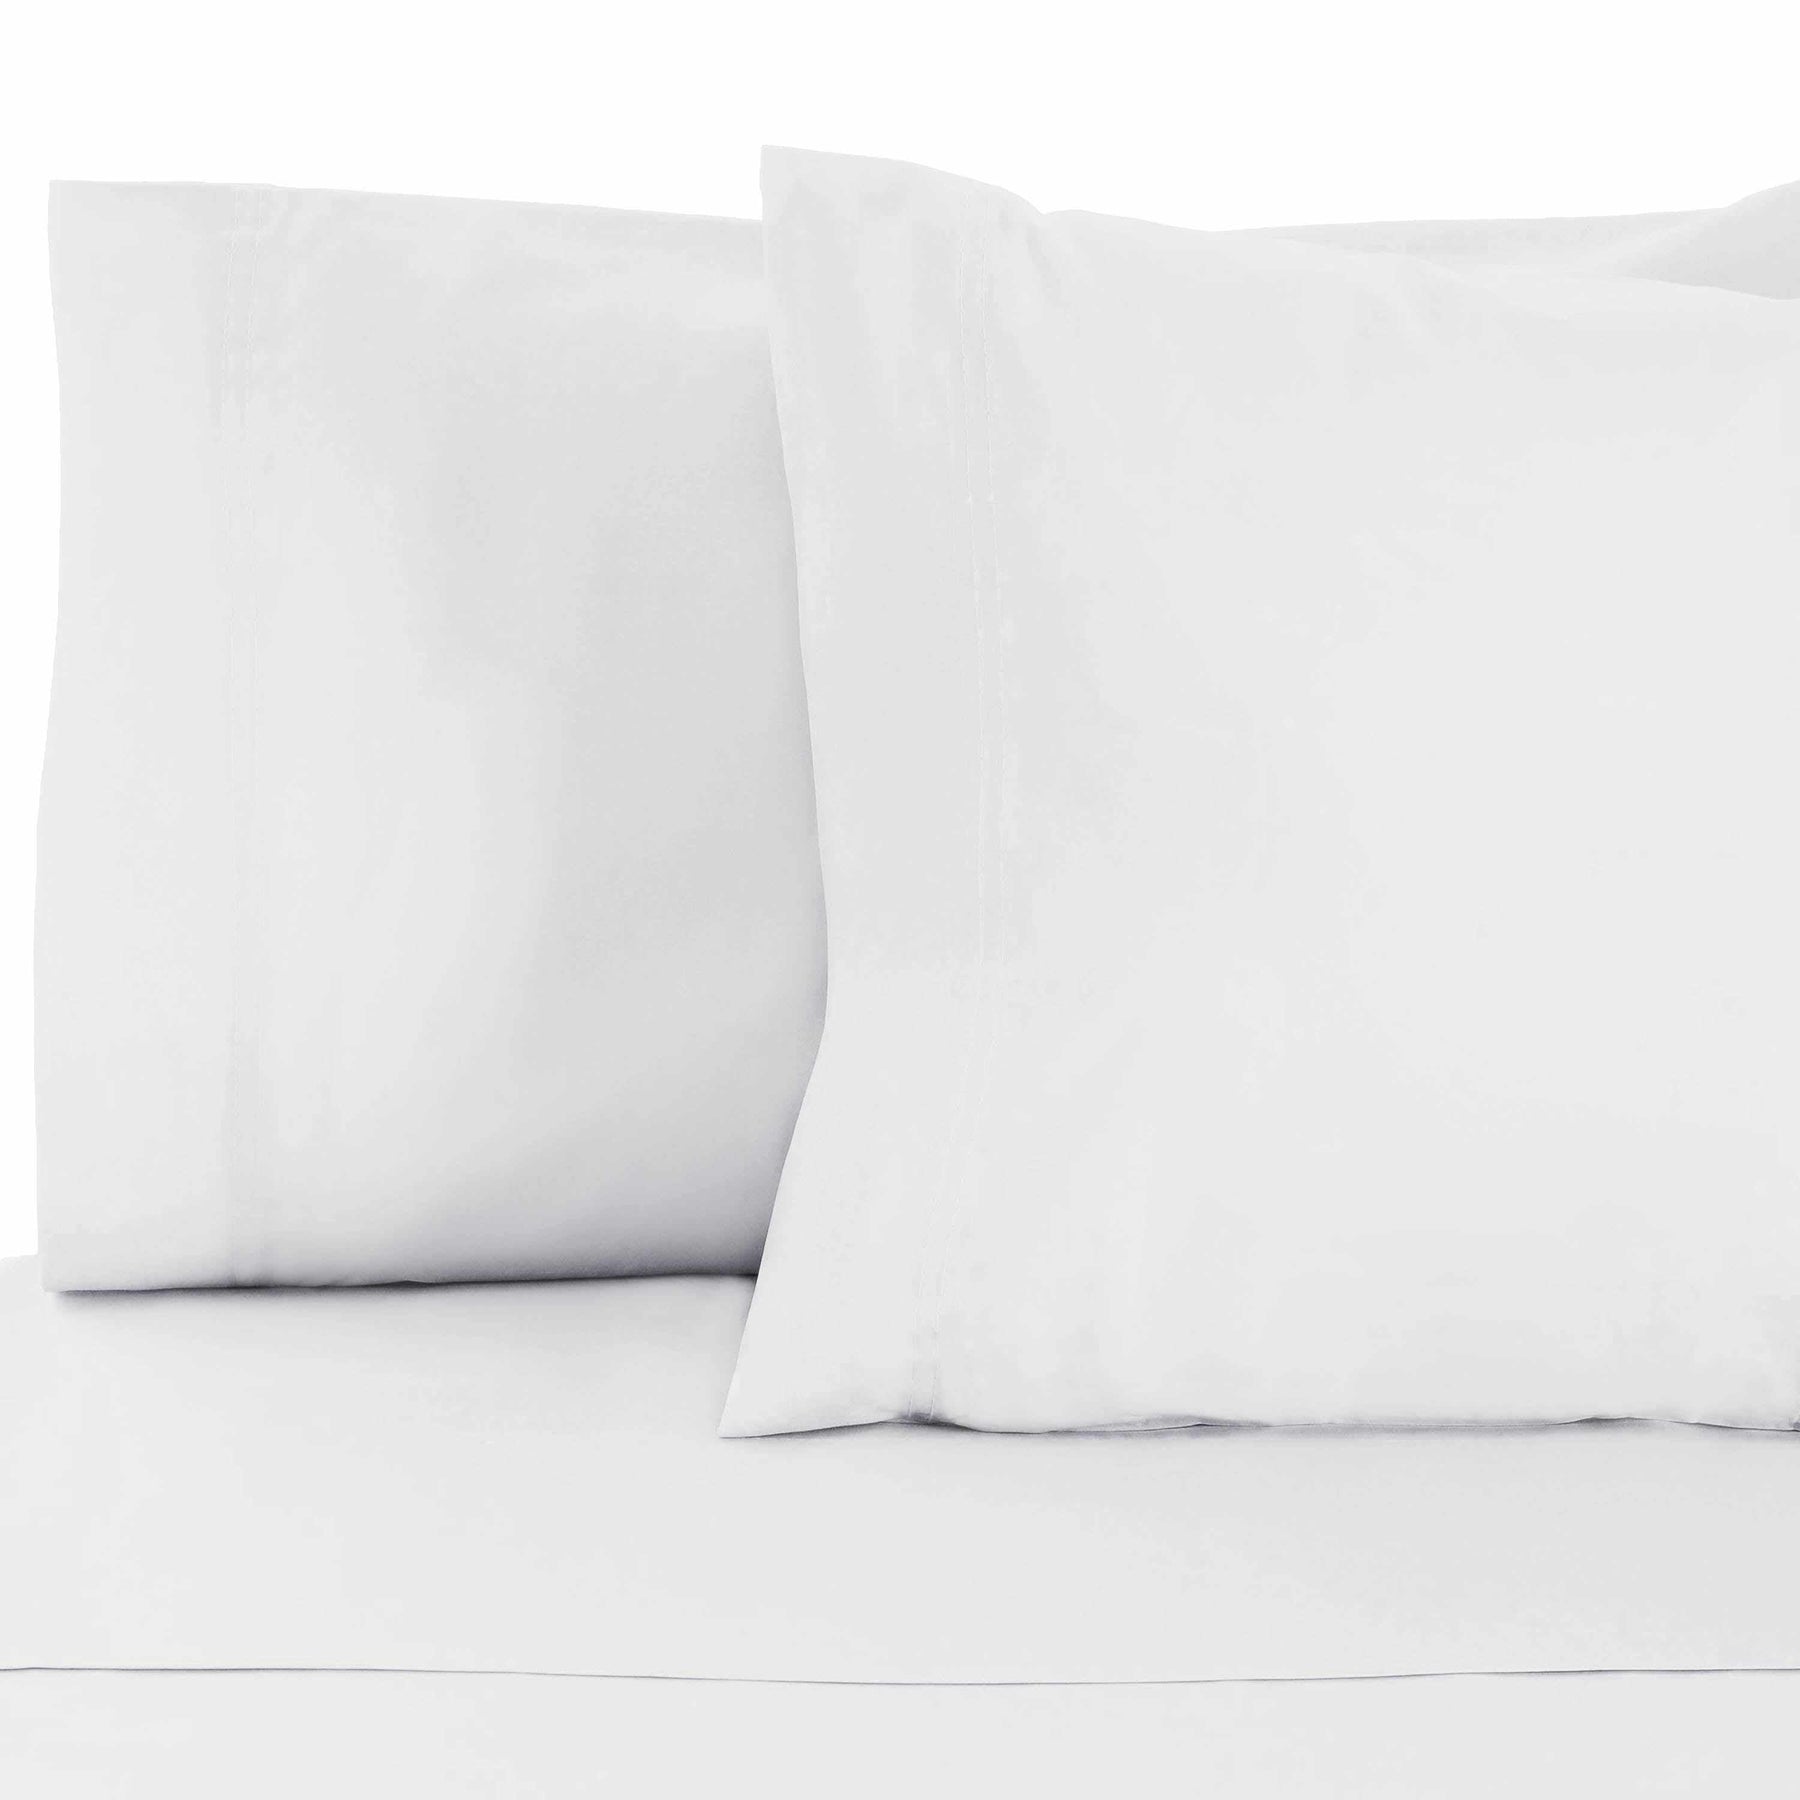 Superior 100% Rayon From Bamboo 300 Thread Count Solid 2 Piece Pillowcase Set - White